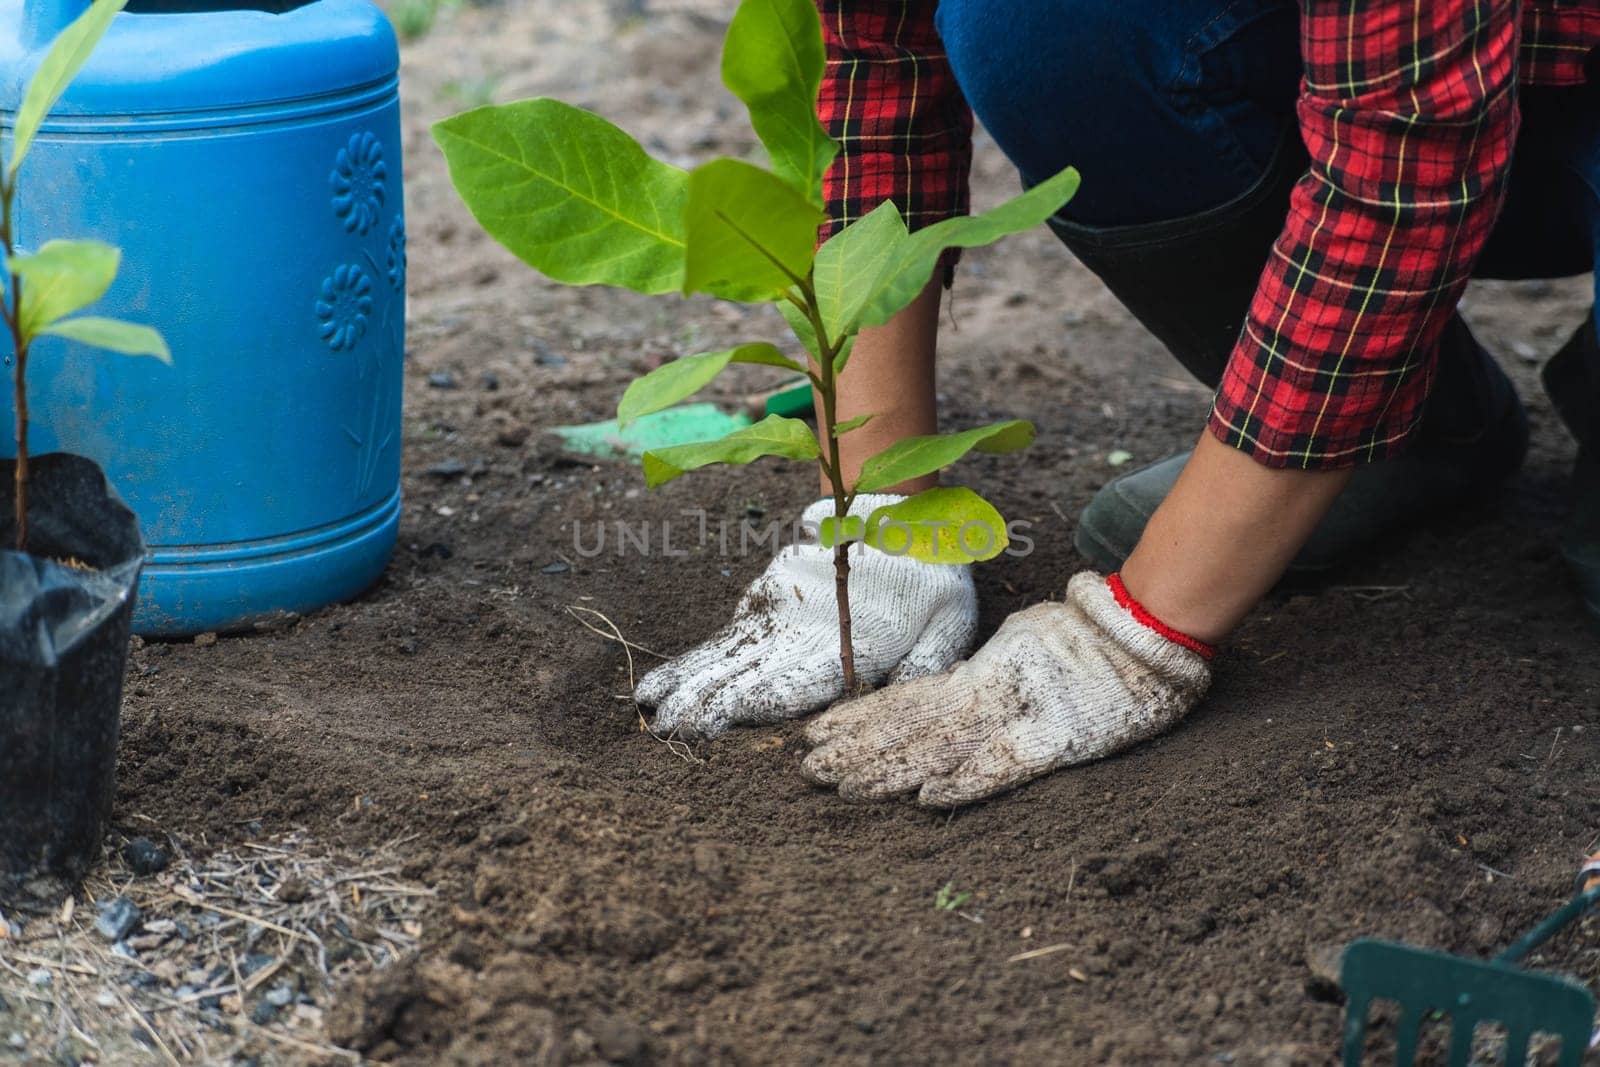 agriculture, botany, care, closeup, cultivate, cultivating, cultivation, digging, dirt, earth, eco, ecology, environment, female, garden, gardener, gardening, gloves, green, greenery, grow, growing, growth, hand, hands, hobby, holding, home, horticulture, landscaping, leaf, lifestyle, nature, person, plant, planting, pot, potted, potting, seedling, soil, sprout, summer, thumb, tool, transplant, transplanting, woman, work, working